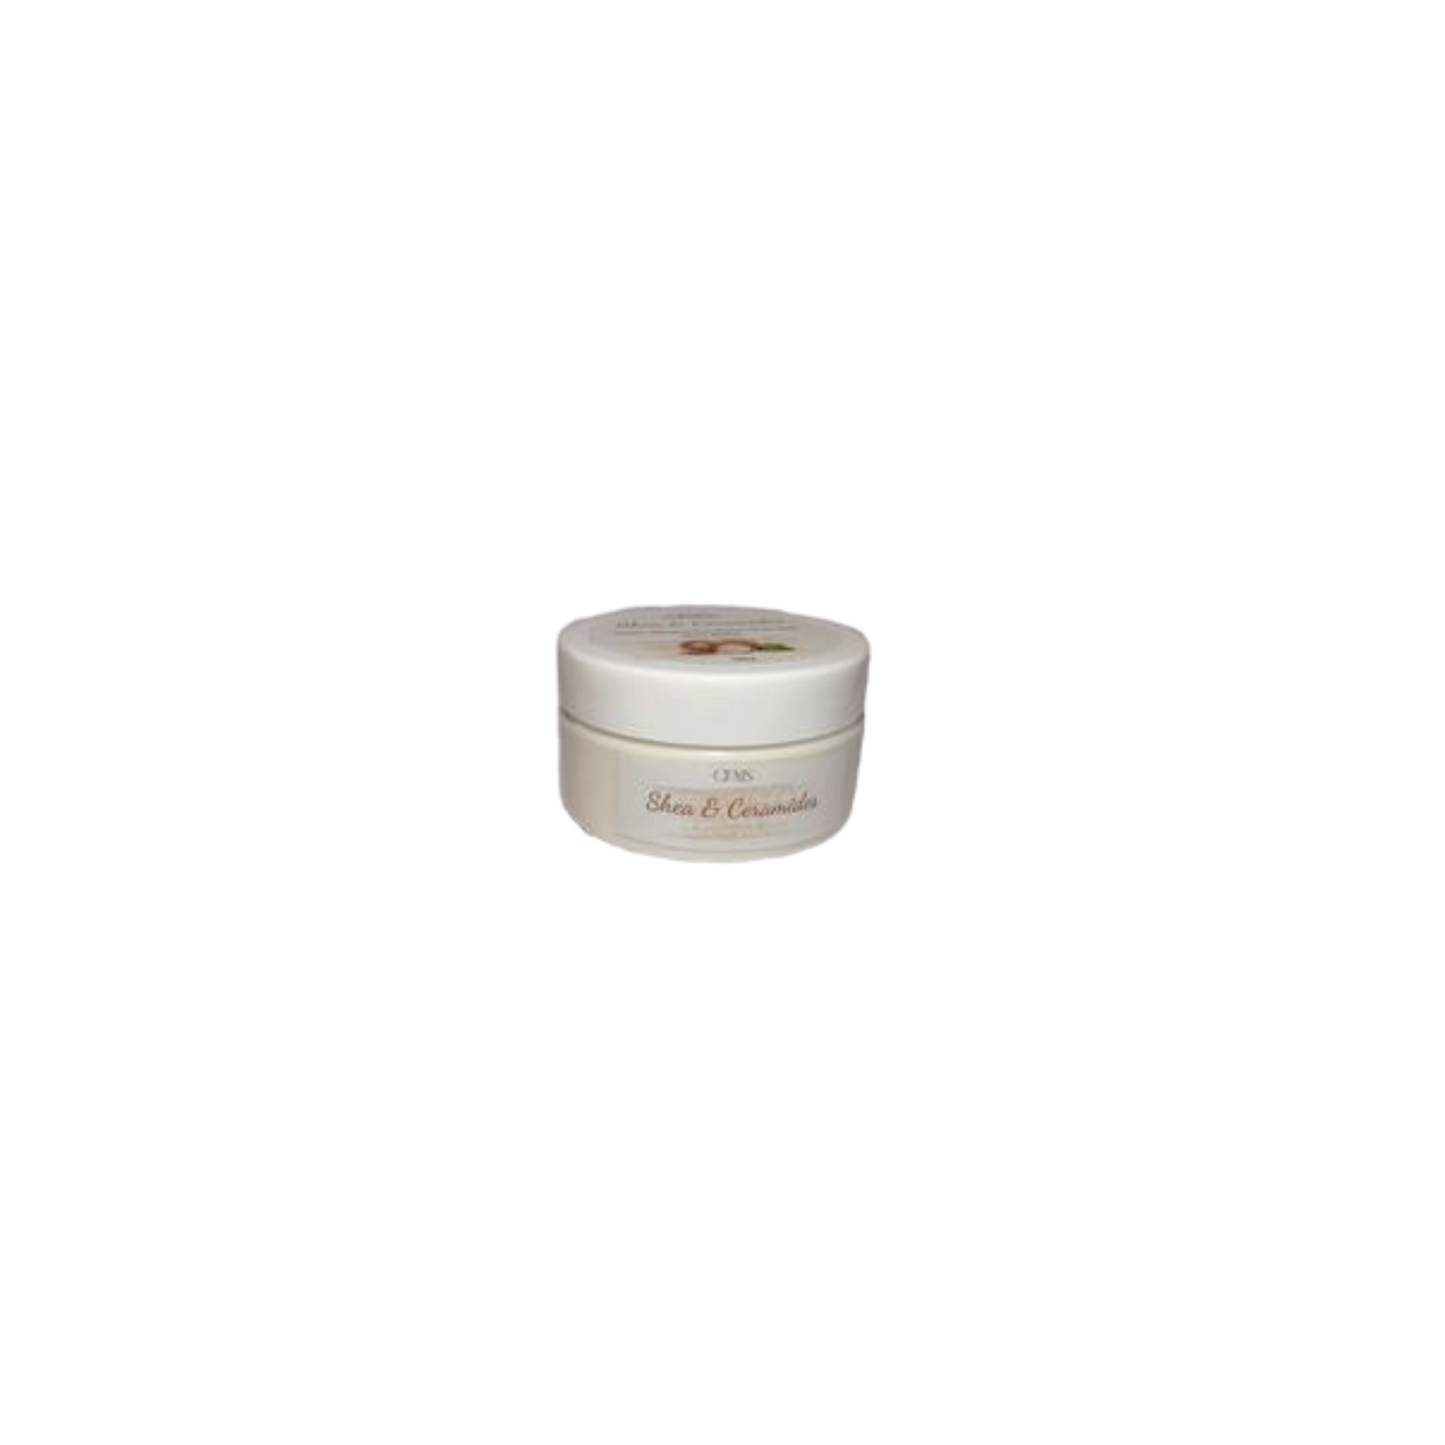 Shea and Ceramides Body Butter